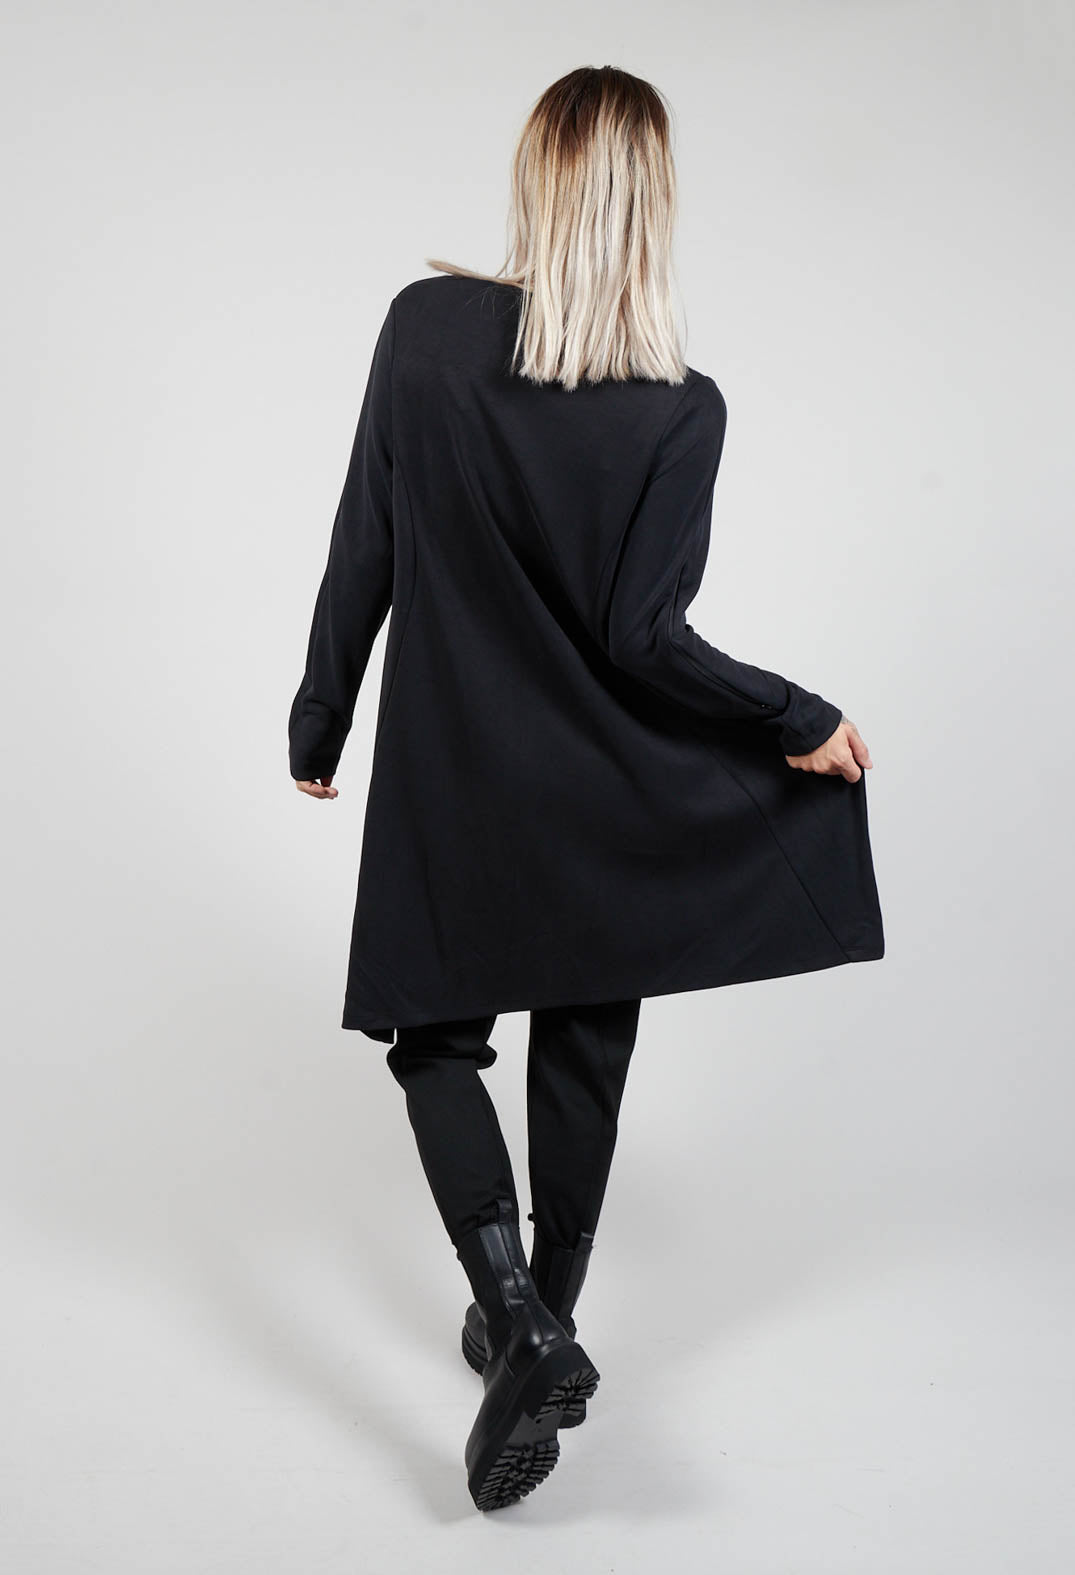 Long Sleeve Dress with Boat Neck in Black